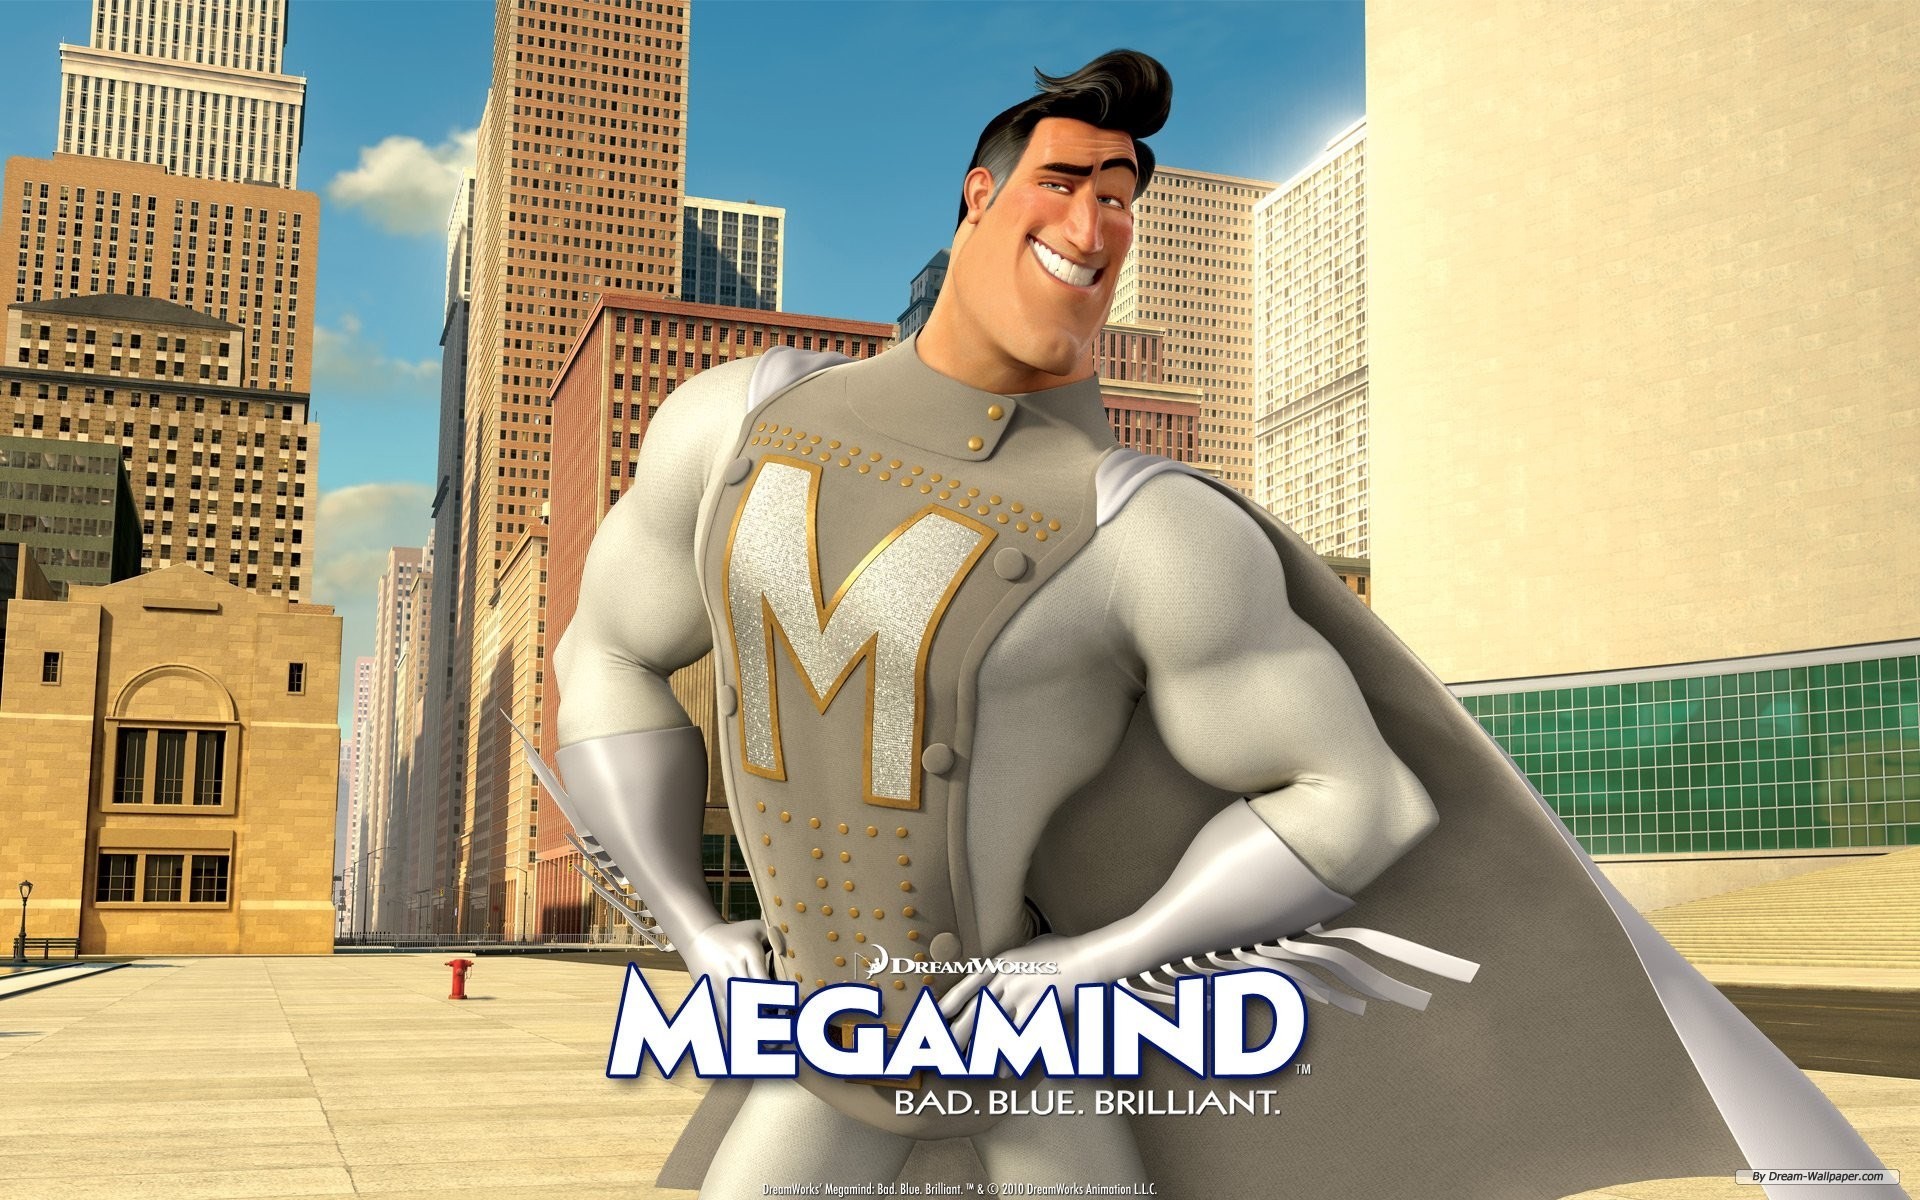 1920x1200 #1646978, megamind category - Widescreen Wallpapers: megamind pic